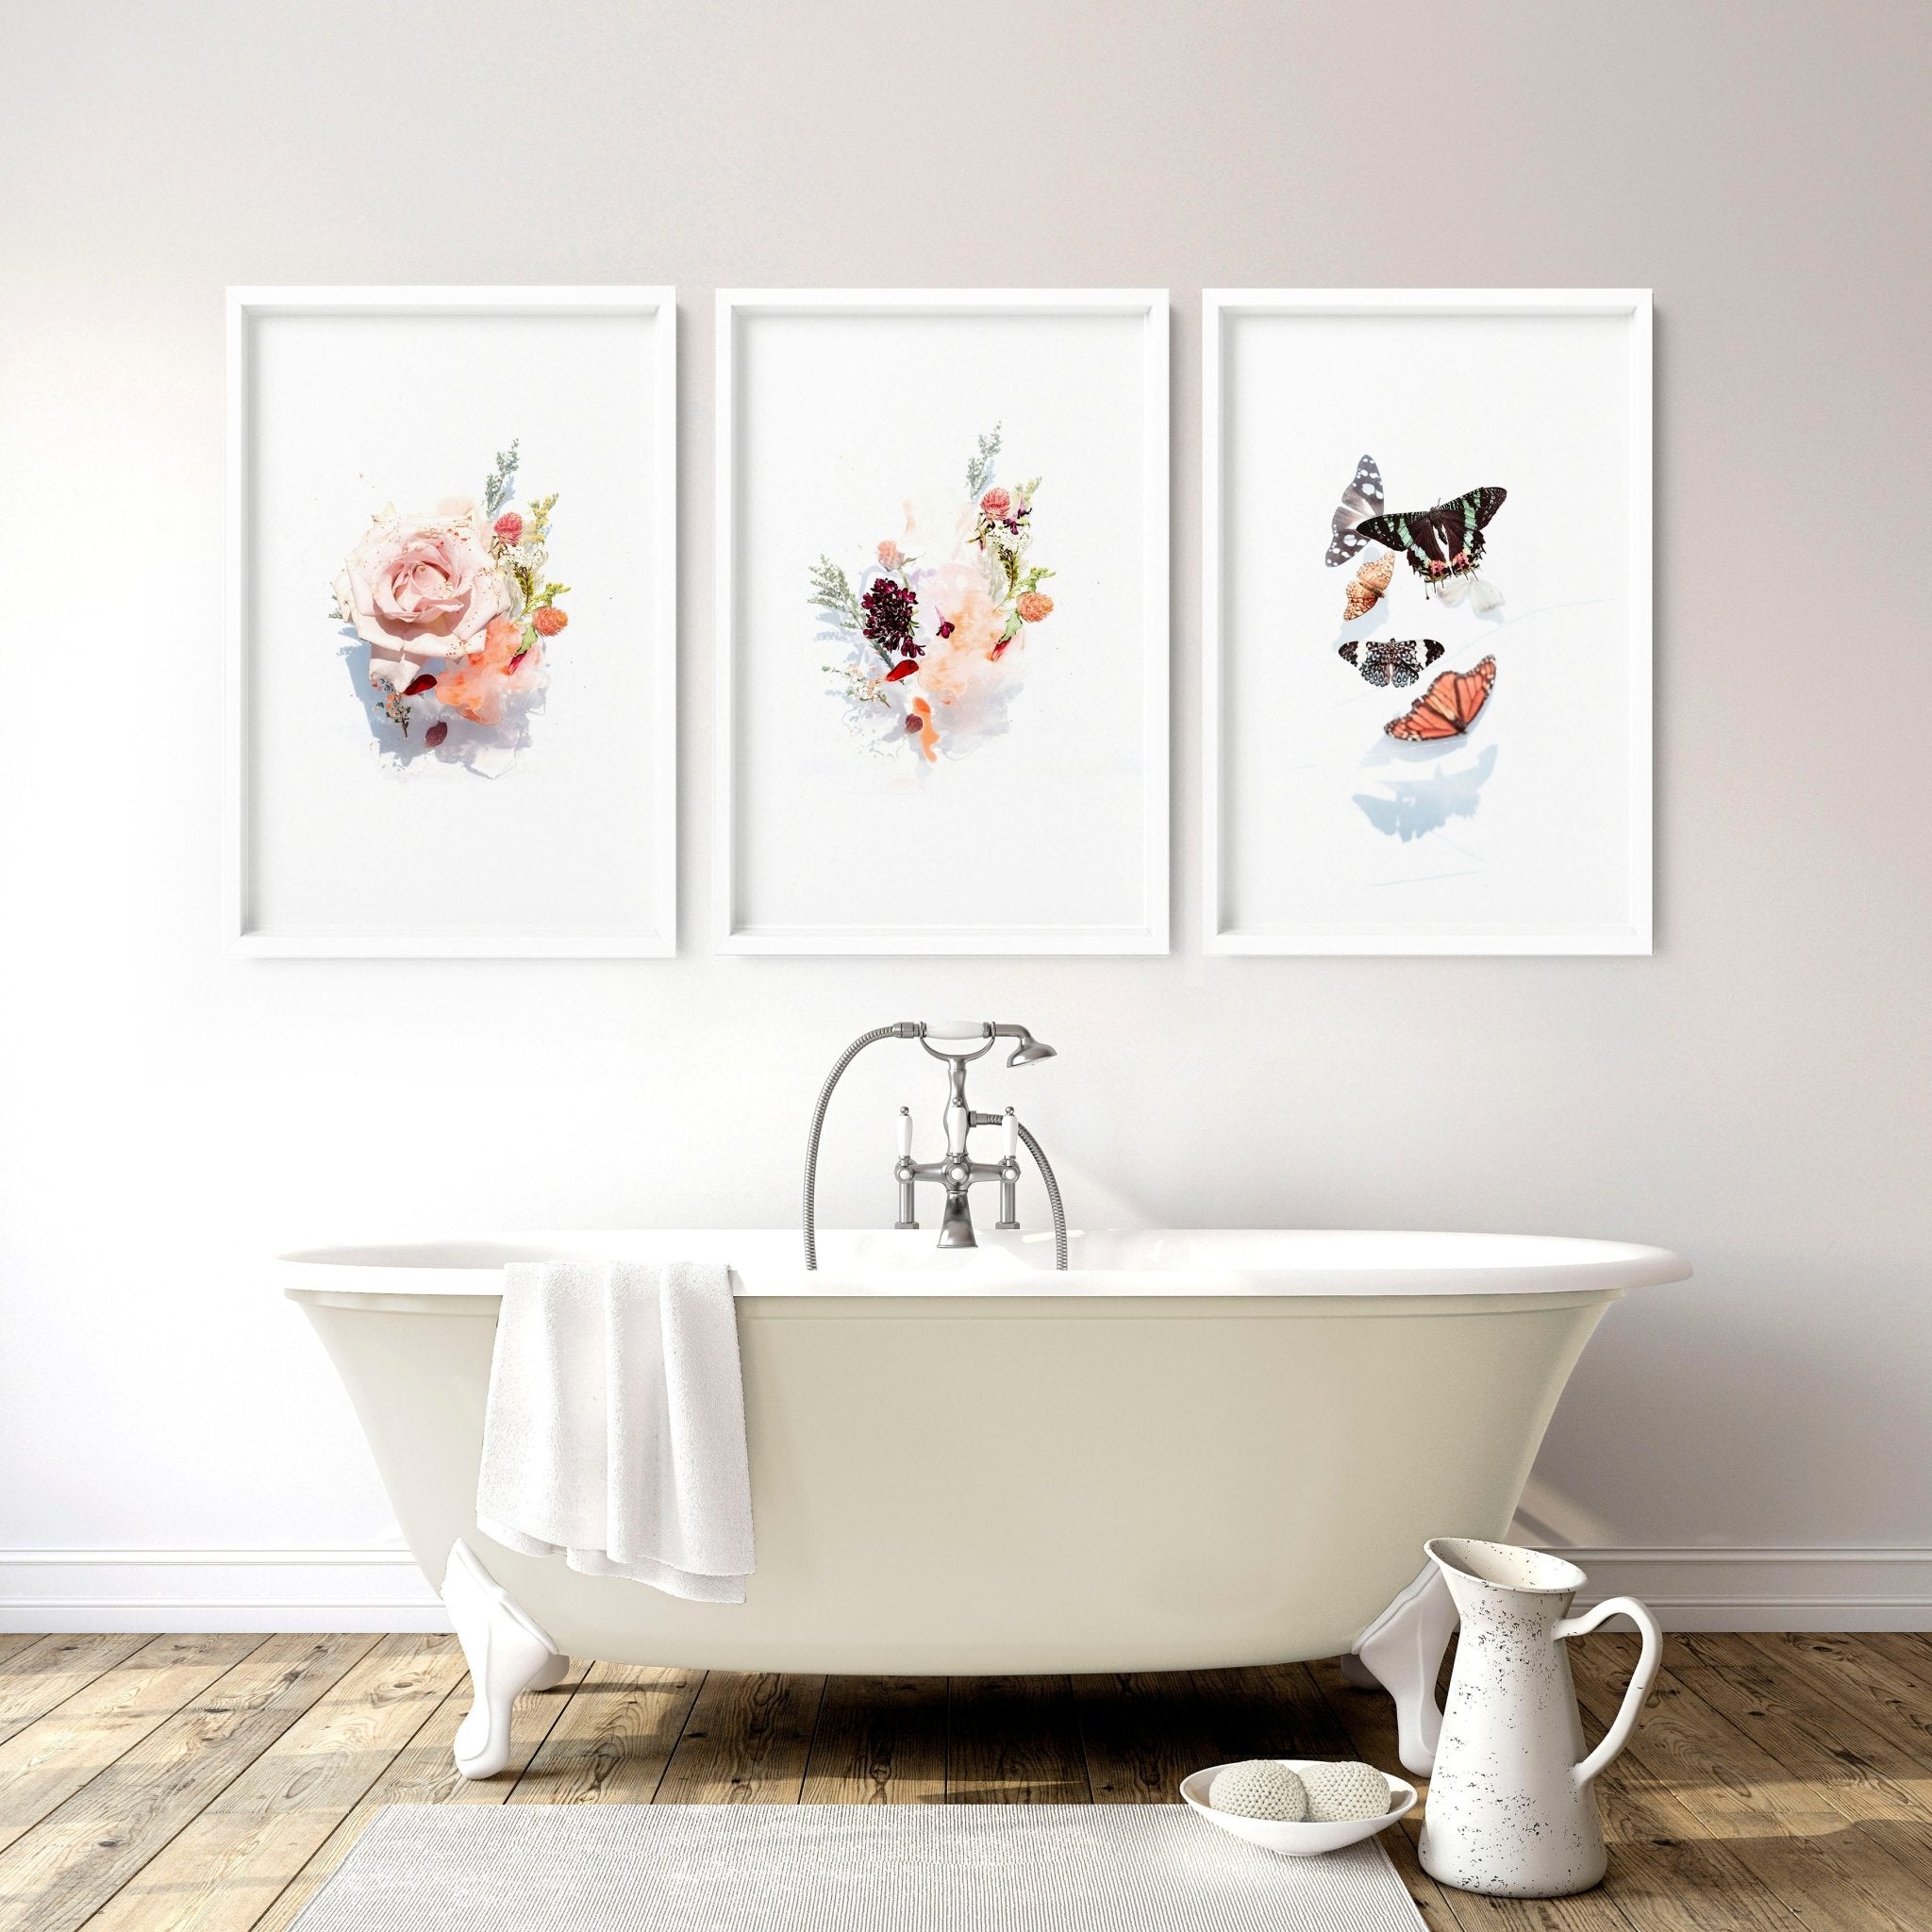 Framed pictures for bathroom | set of 3 wall art prints - About Wall Art